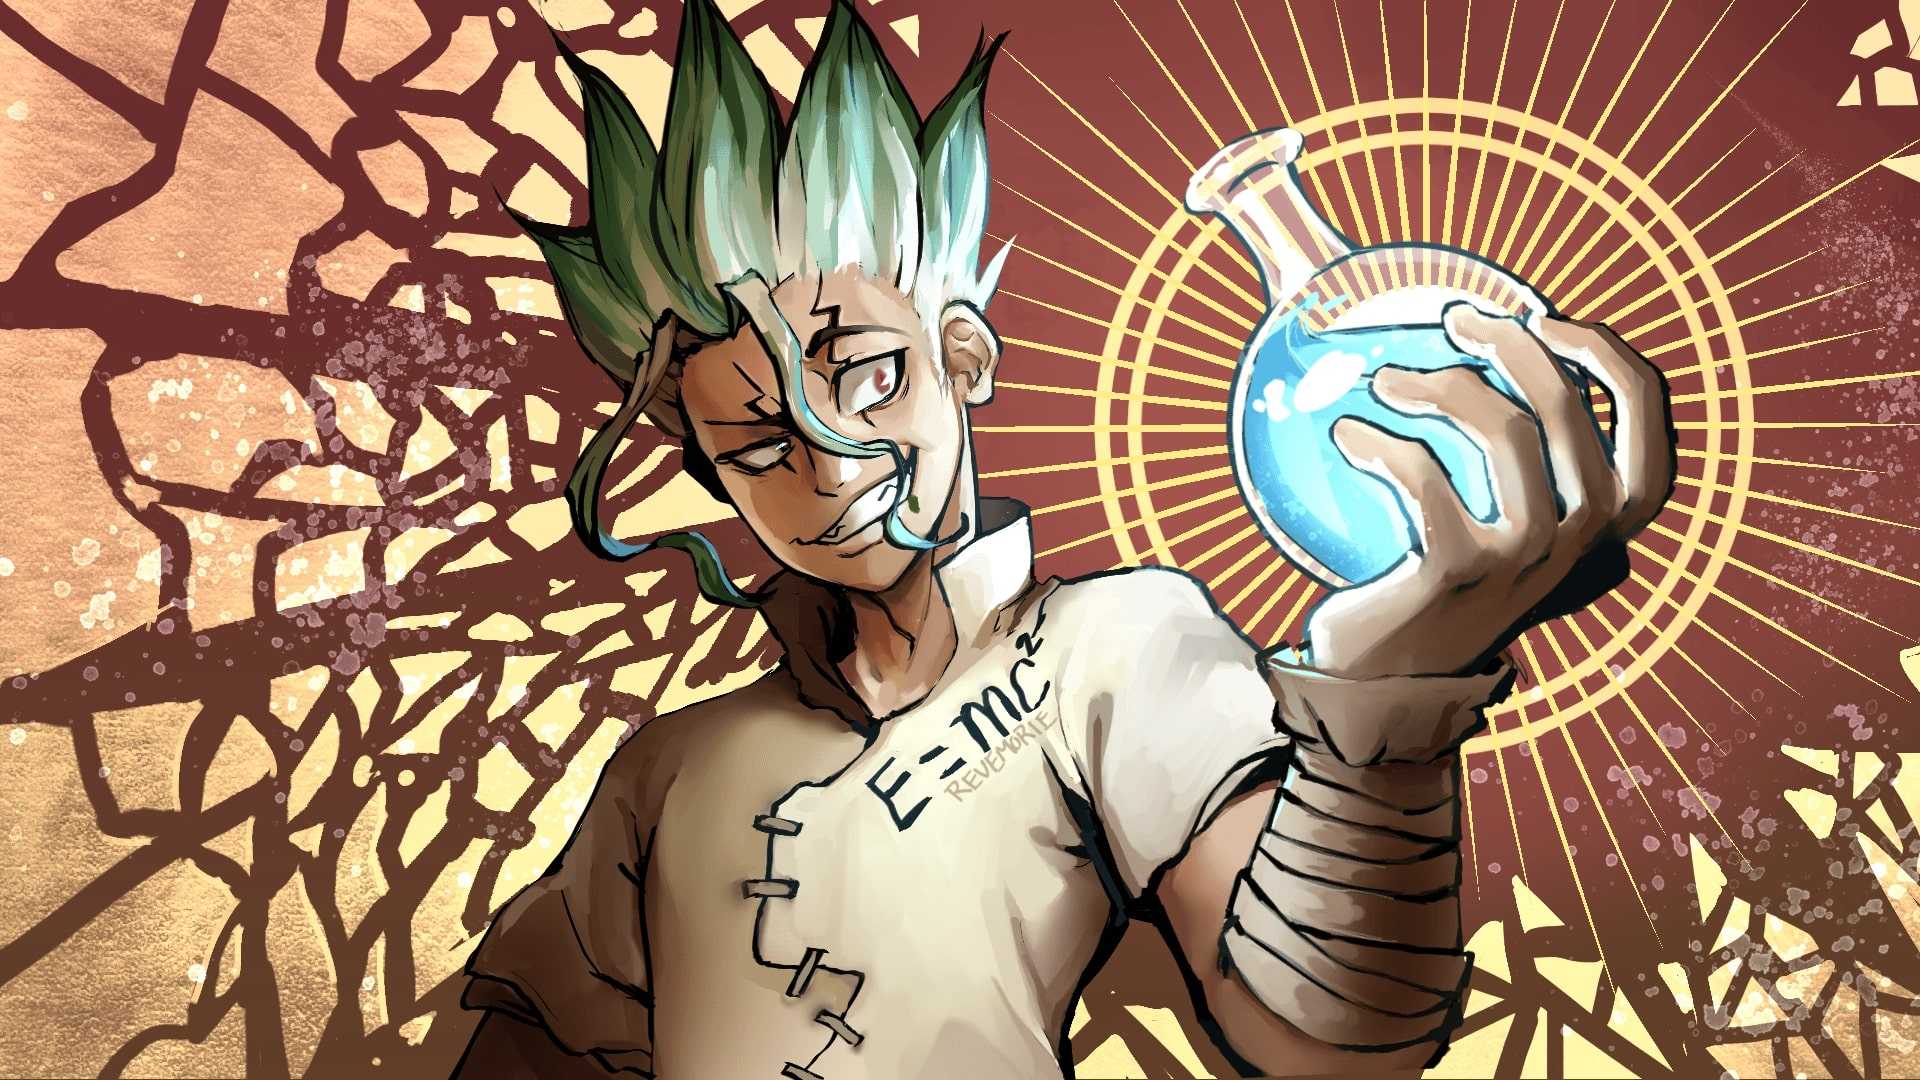 Dr Stone Wallpapers Kolpaper Awesome Free Hd Wallpapers